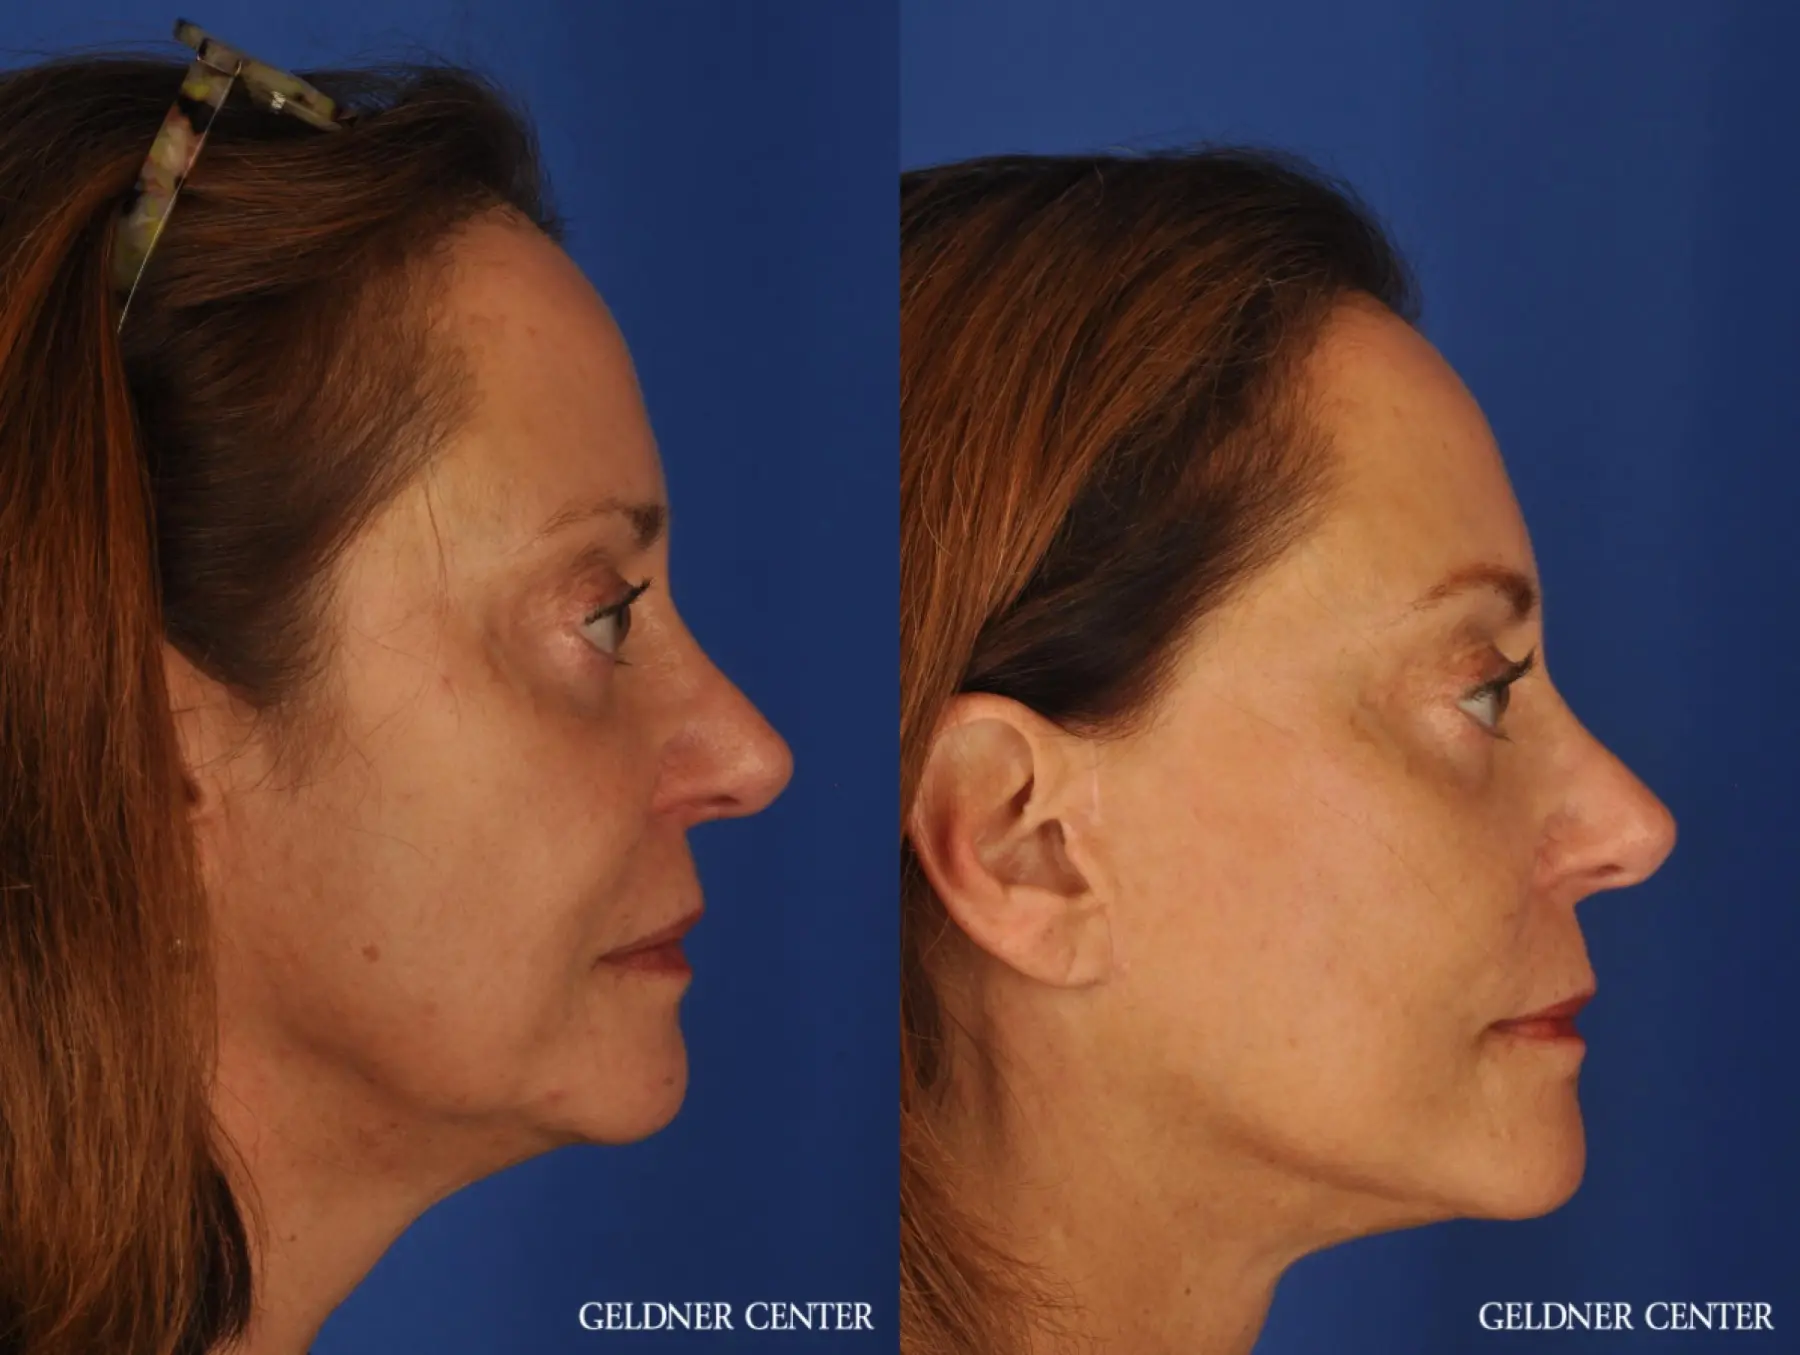 Facelift & Neck Lift: Patient 1 - Before and After 2